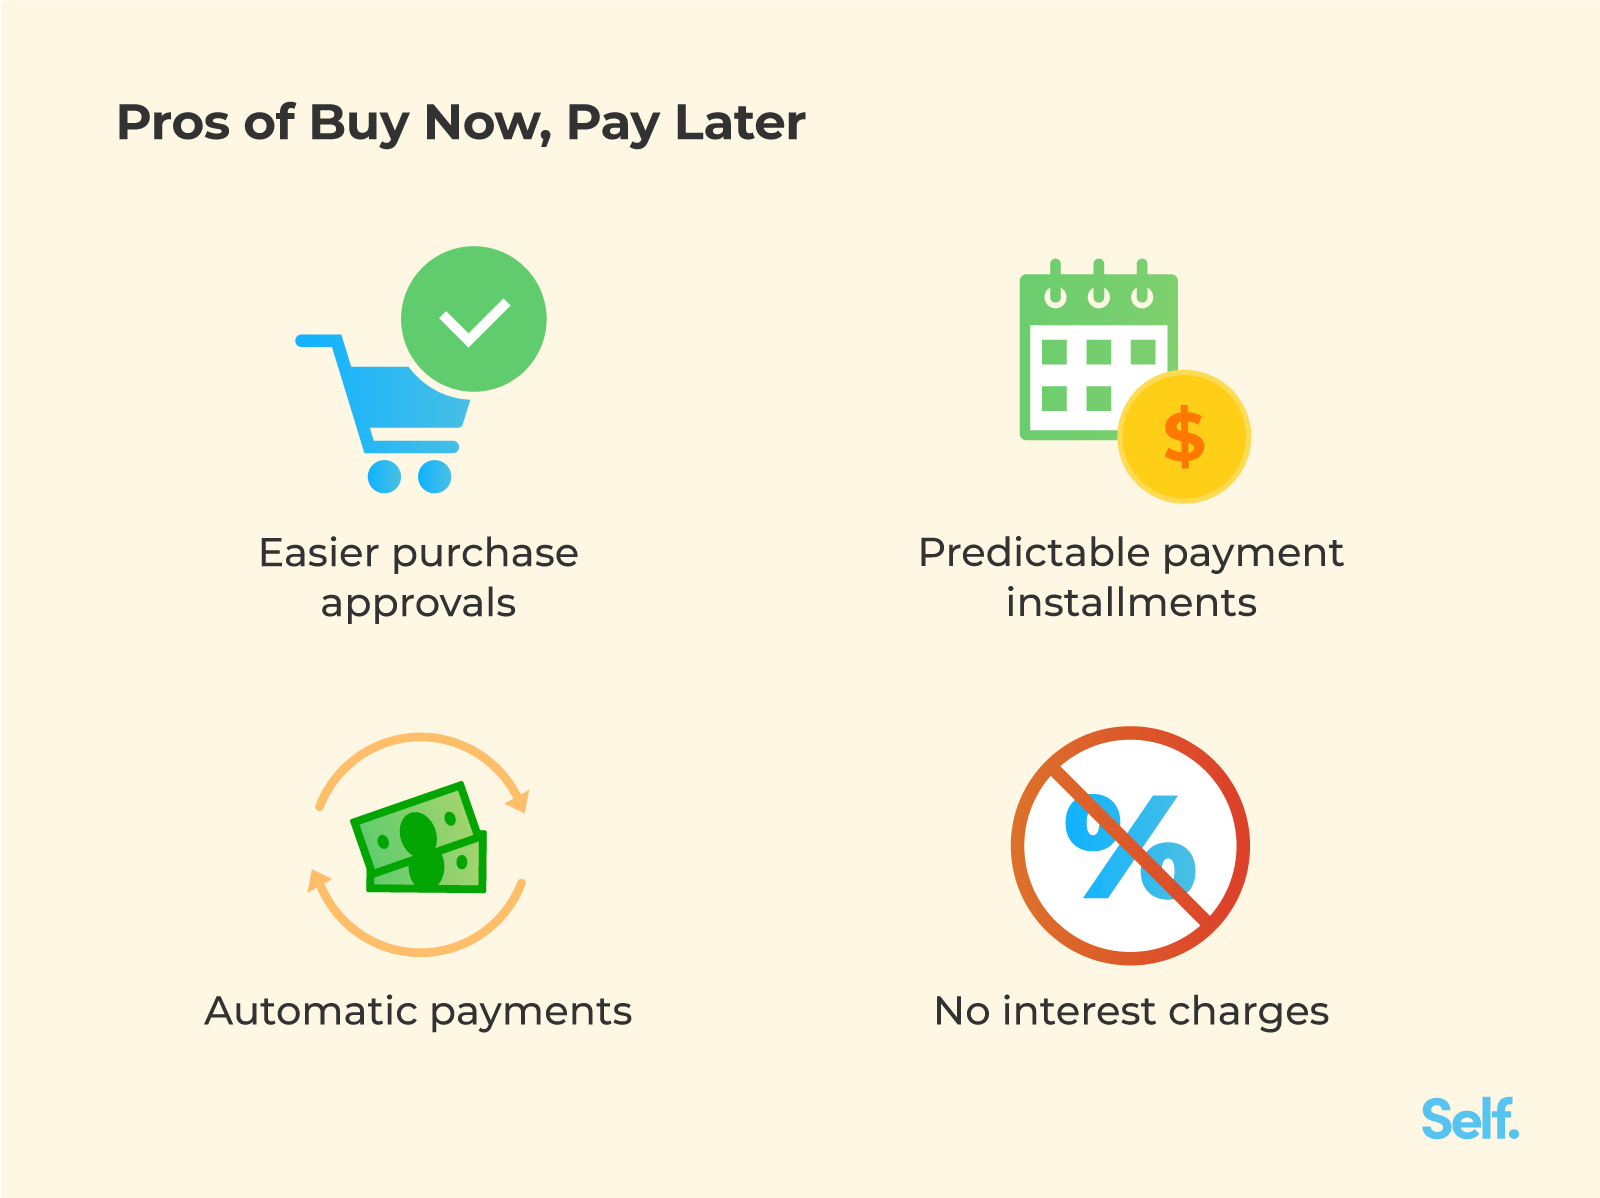 02-Pros-of-Buy-Now-Pay-Later